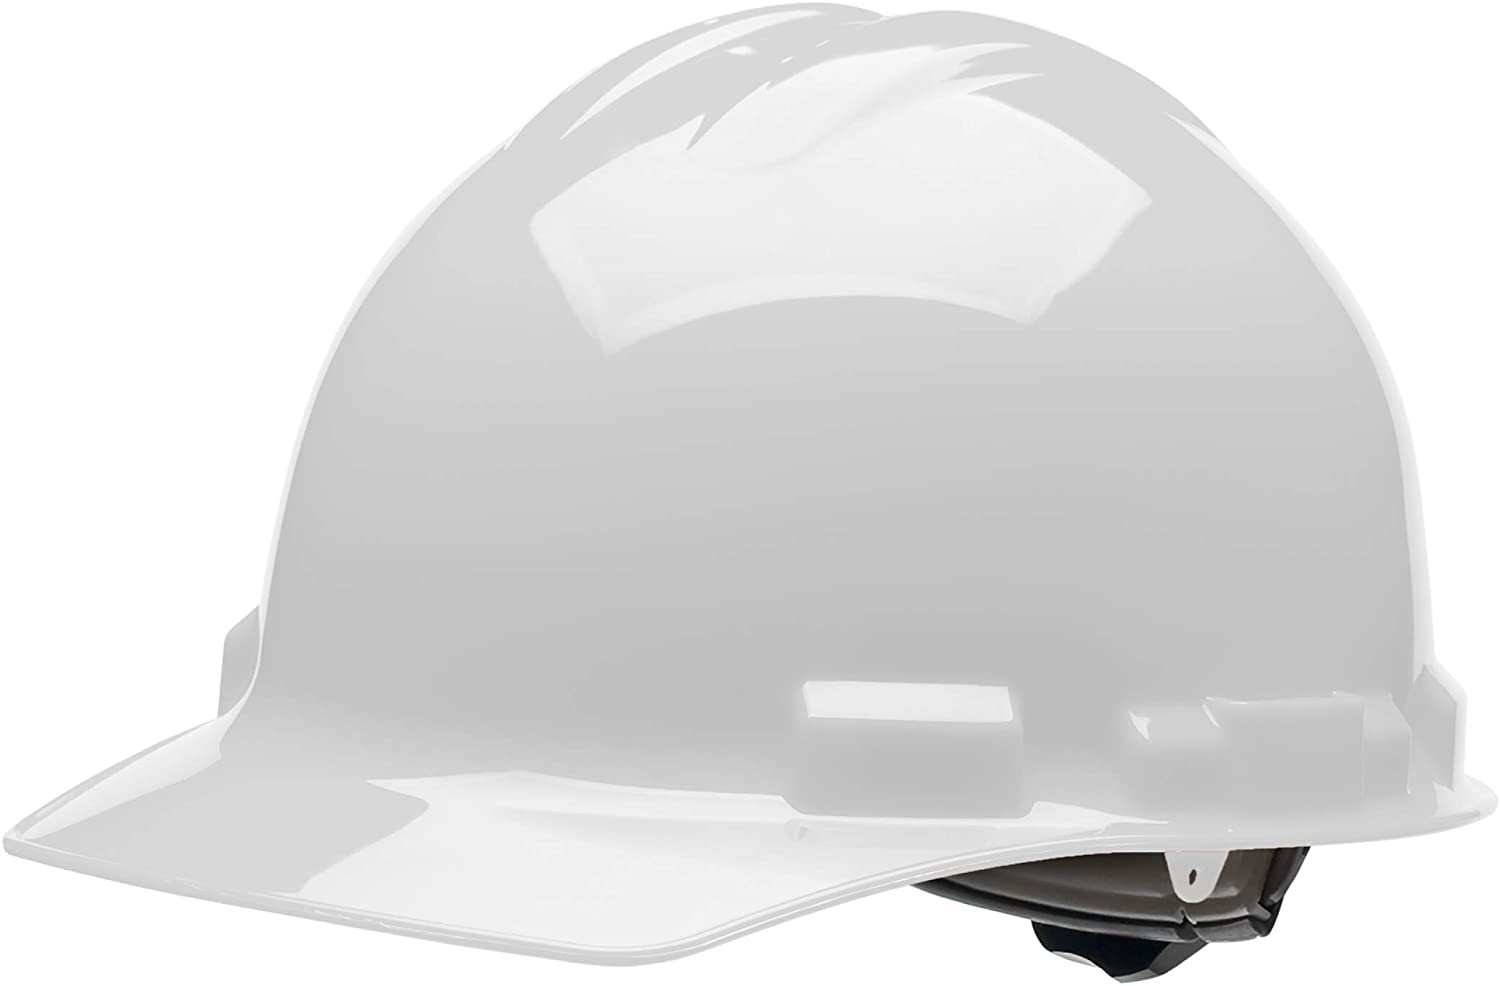 Buy HDPE ABS White Construction Safety Helmets With Permeable Holes at wholesale prices